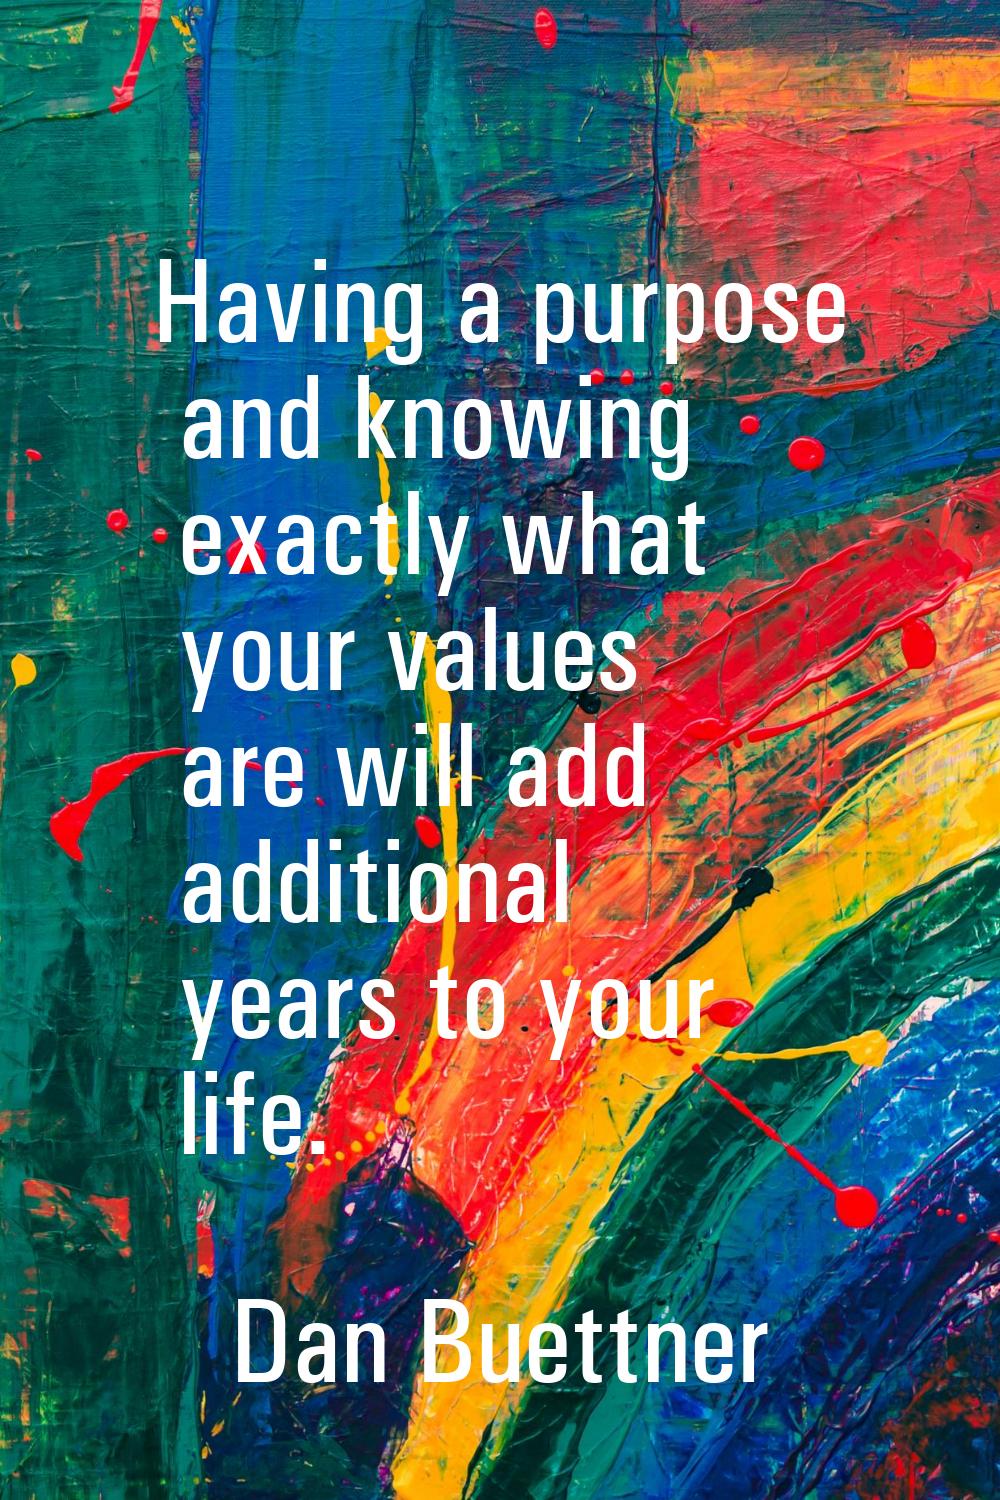 Having a purpose and knowing exactly what your values are will add additional years to your life.